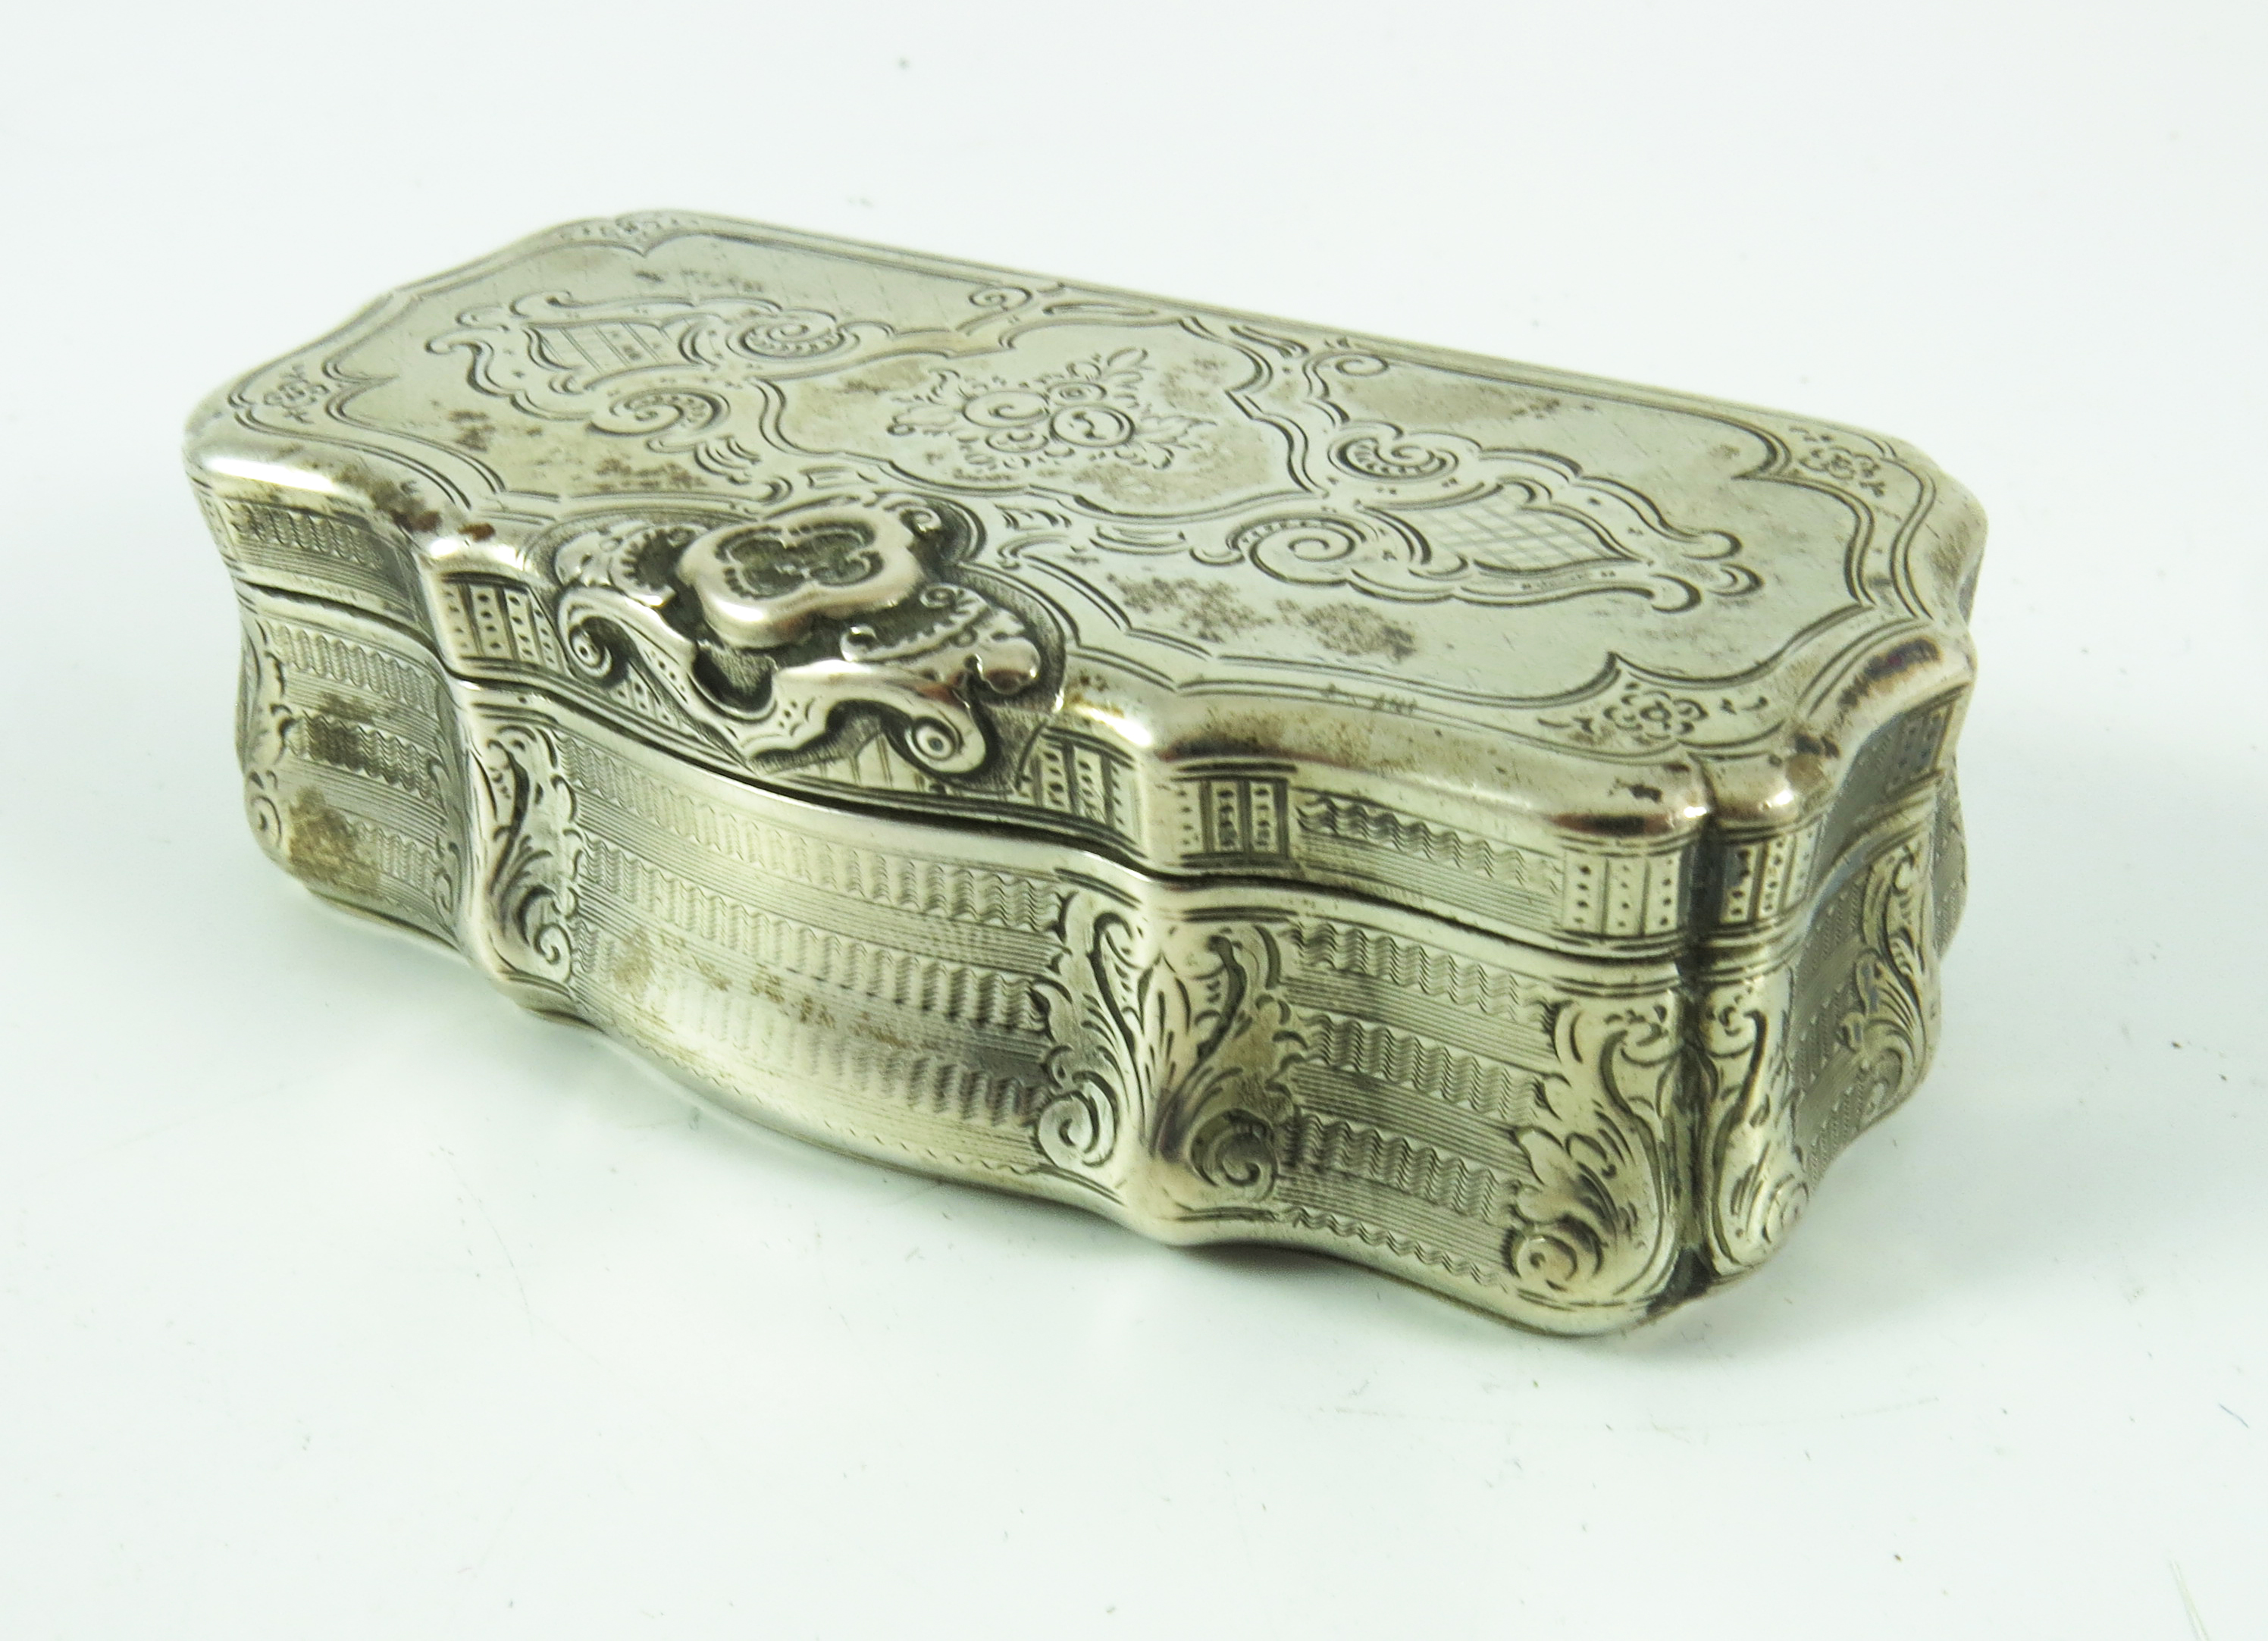 CONTINENTAL, POSSIBLY DUTCH, WHITE METAL TRINKET BOX WITH HINGED COVER - Image 4 of 6